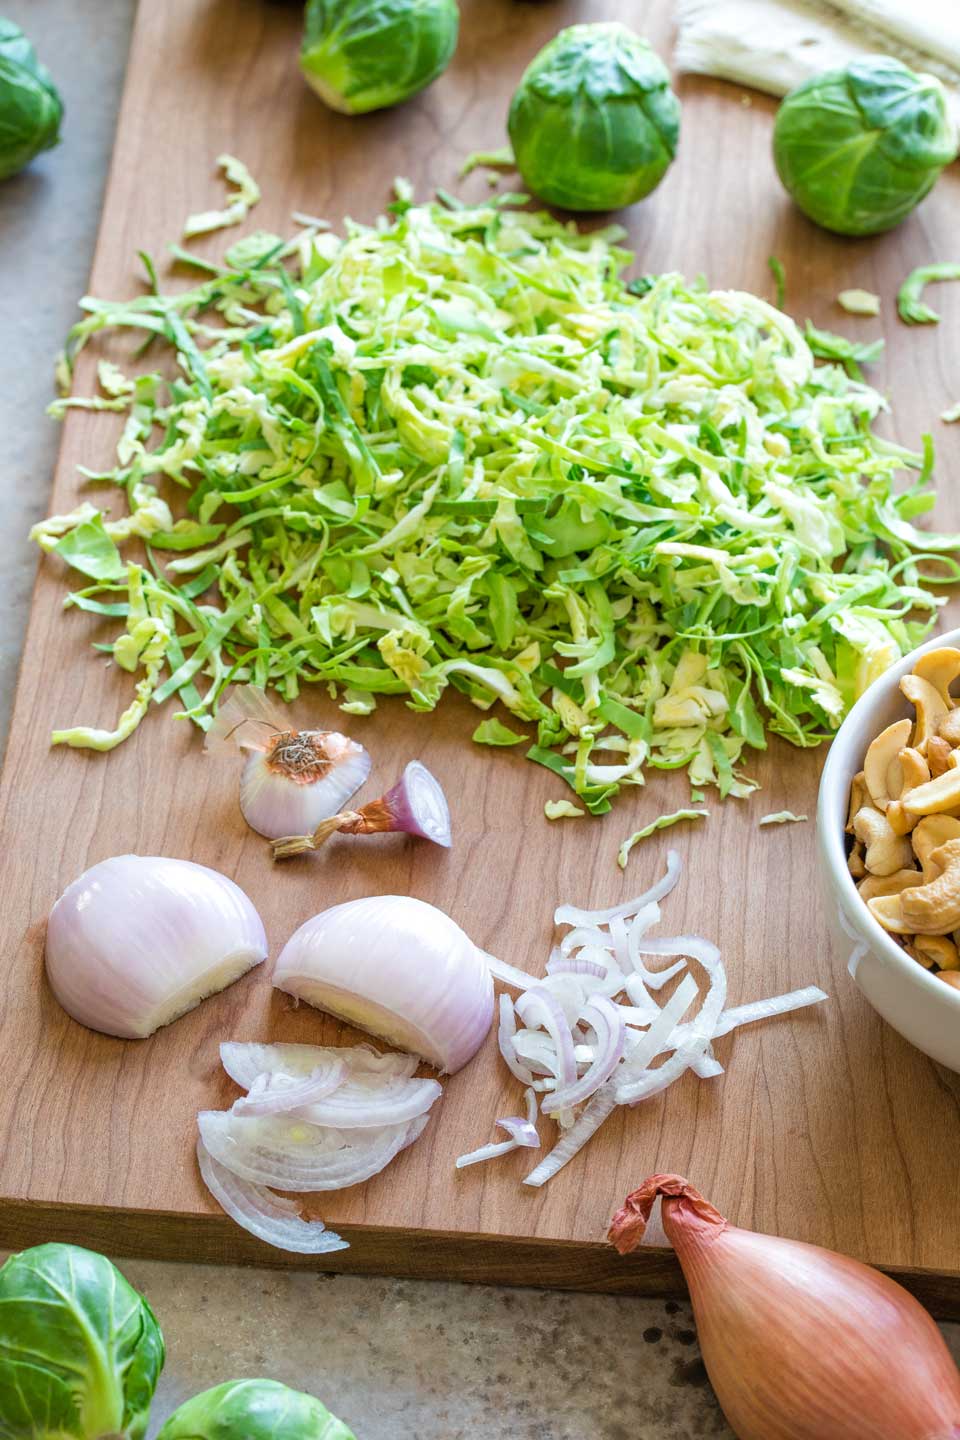 Partially sliced shallots on cutting board with a pile of shredded Brussel sprouts behind.